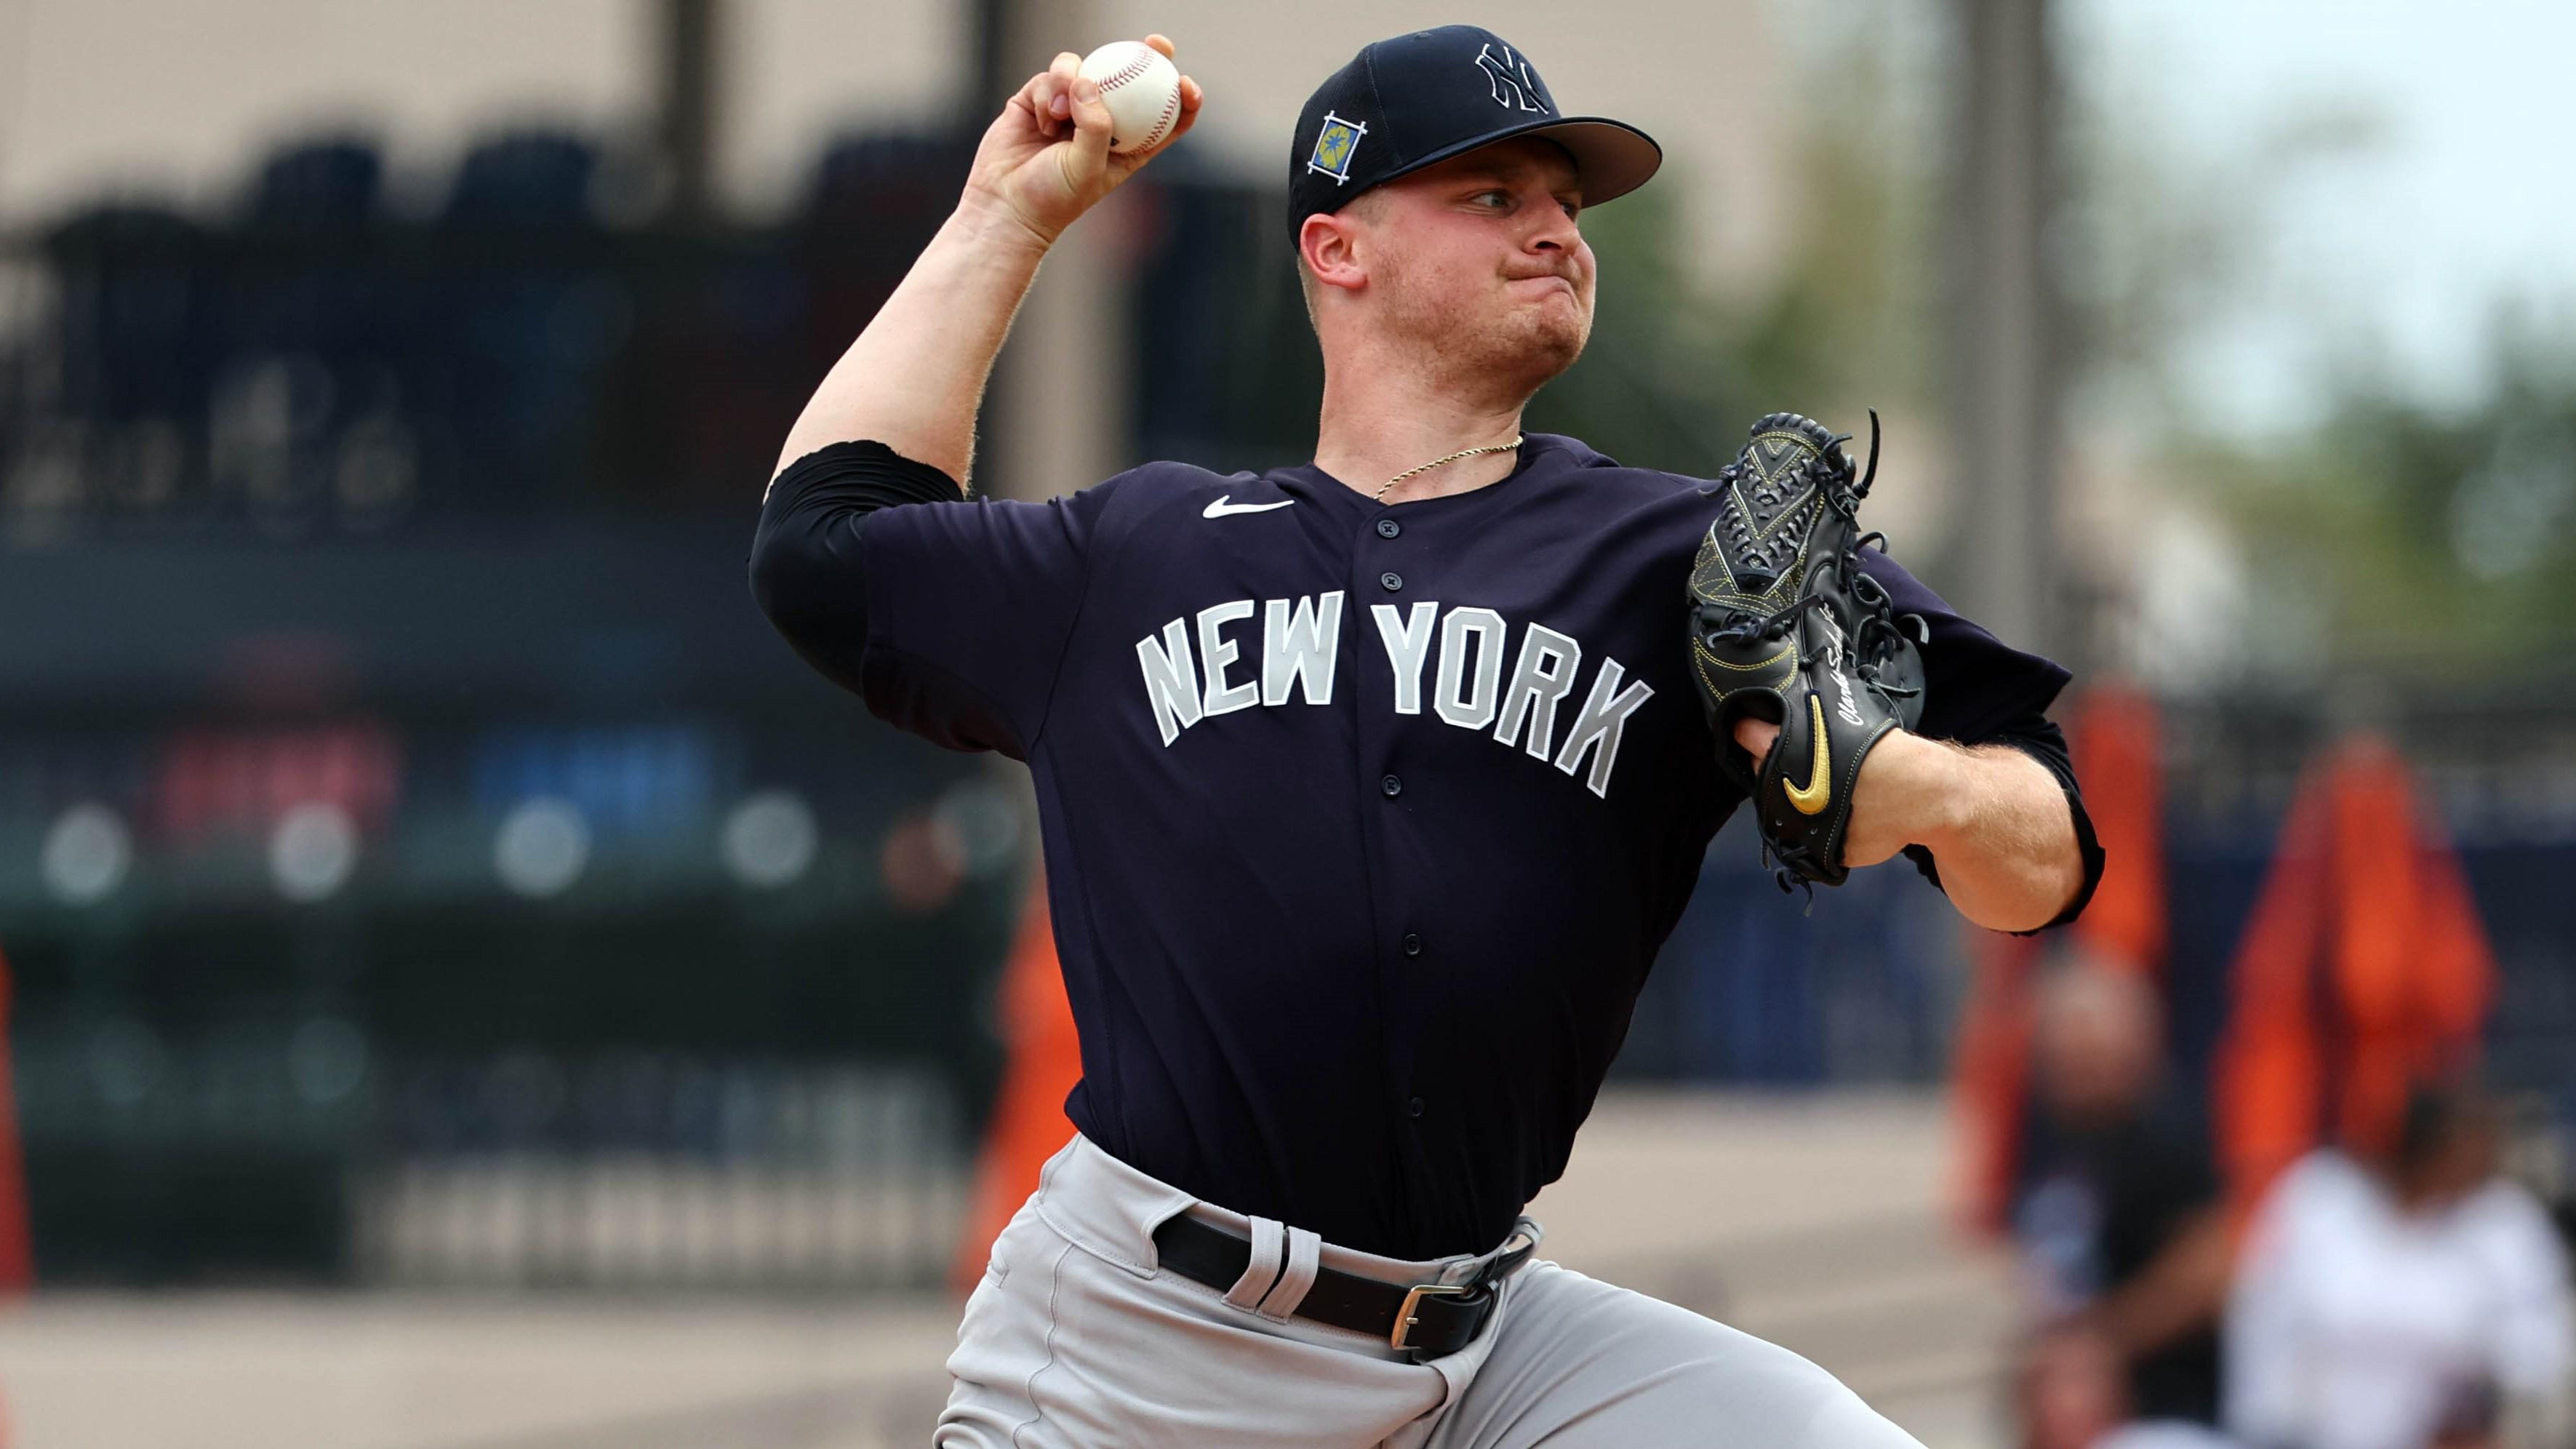 Mar 24, 2022; Lakeland, Florida, USA; New York Yankees pitcher Clarke Schmidt (86) throws a pitch during the first inning against the Detroit Tigers during spring training at Publix Field at Joker Marchant Stadium. Mandatory Credit: Kim Klement-USA TODAY Sports / Kim Klement-USA TODAY Sports